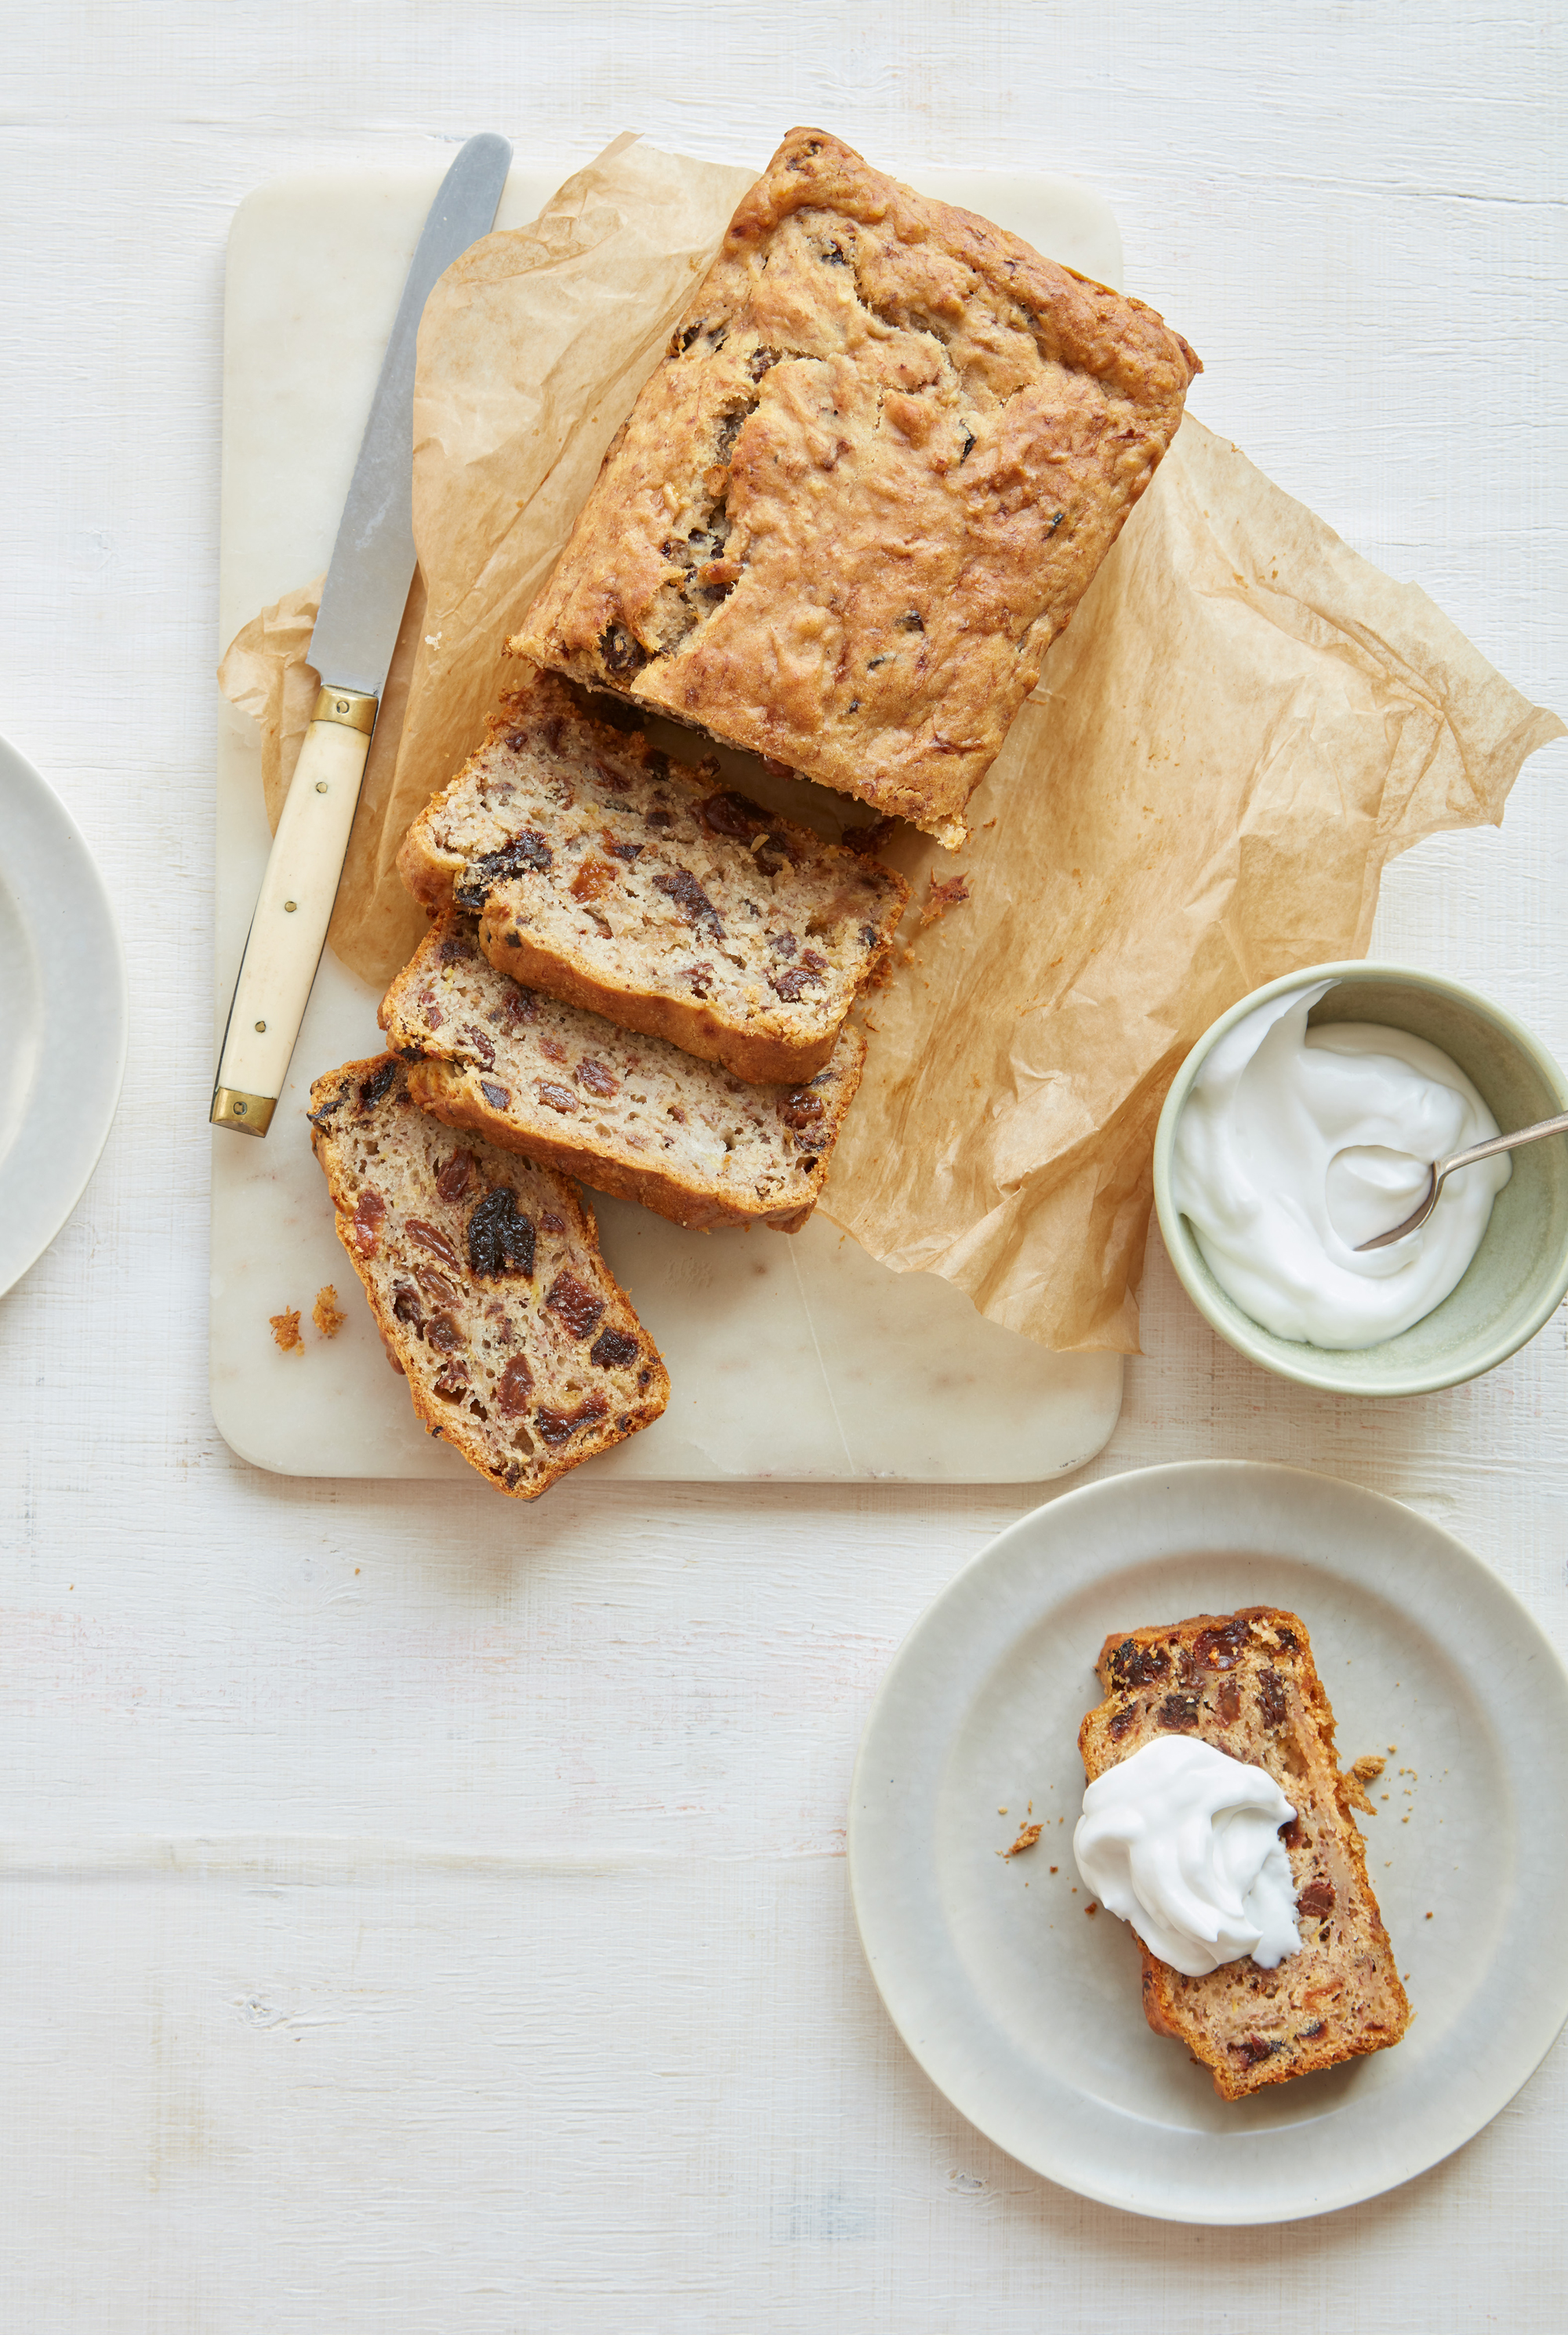 Deliciously Ella's banana and olive oil loaf